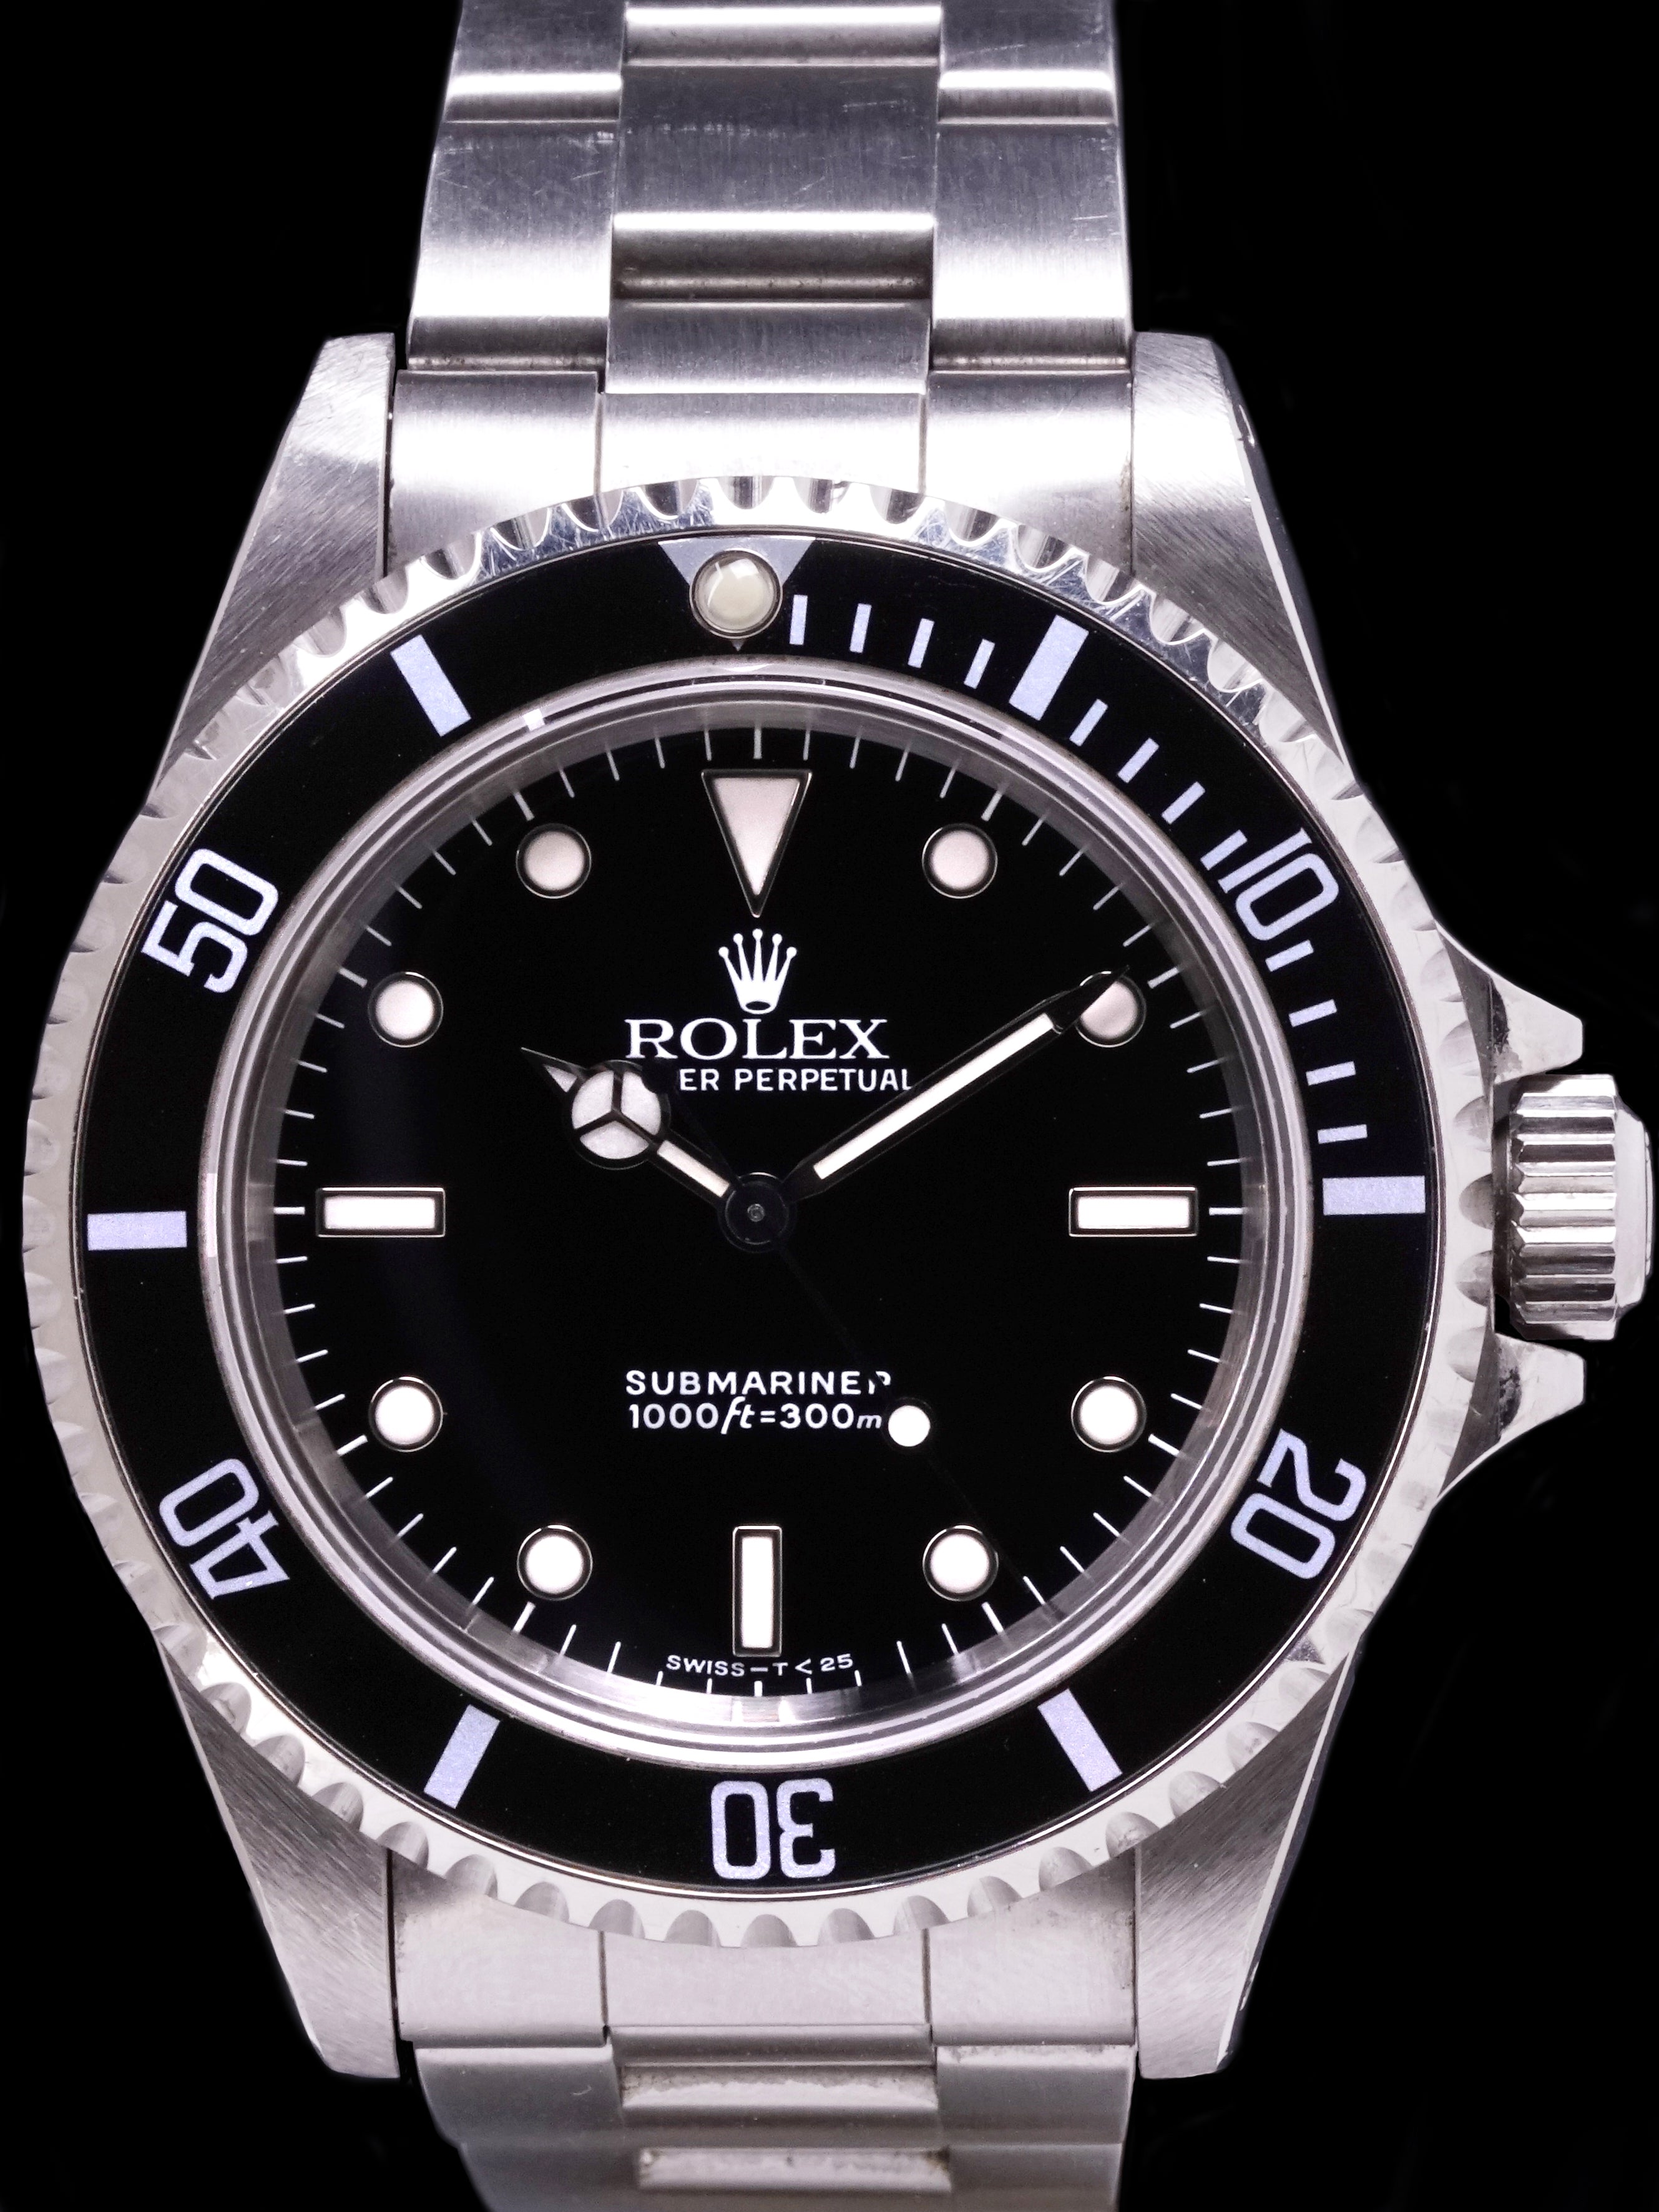 *Unpolished* 1995 Rolex Submariner (Ref. 14060) W/ Box, Papers, & Sales Receipts